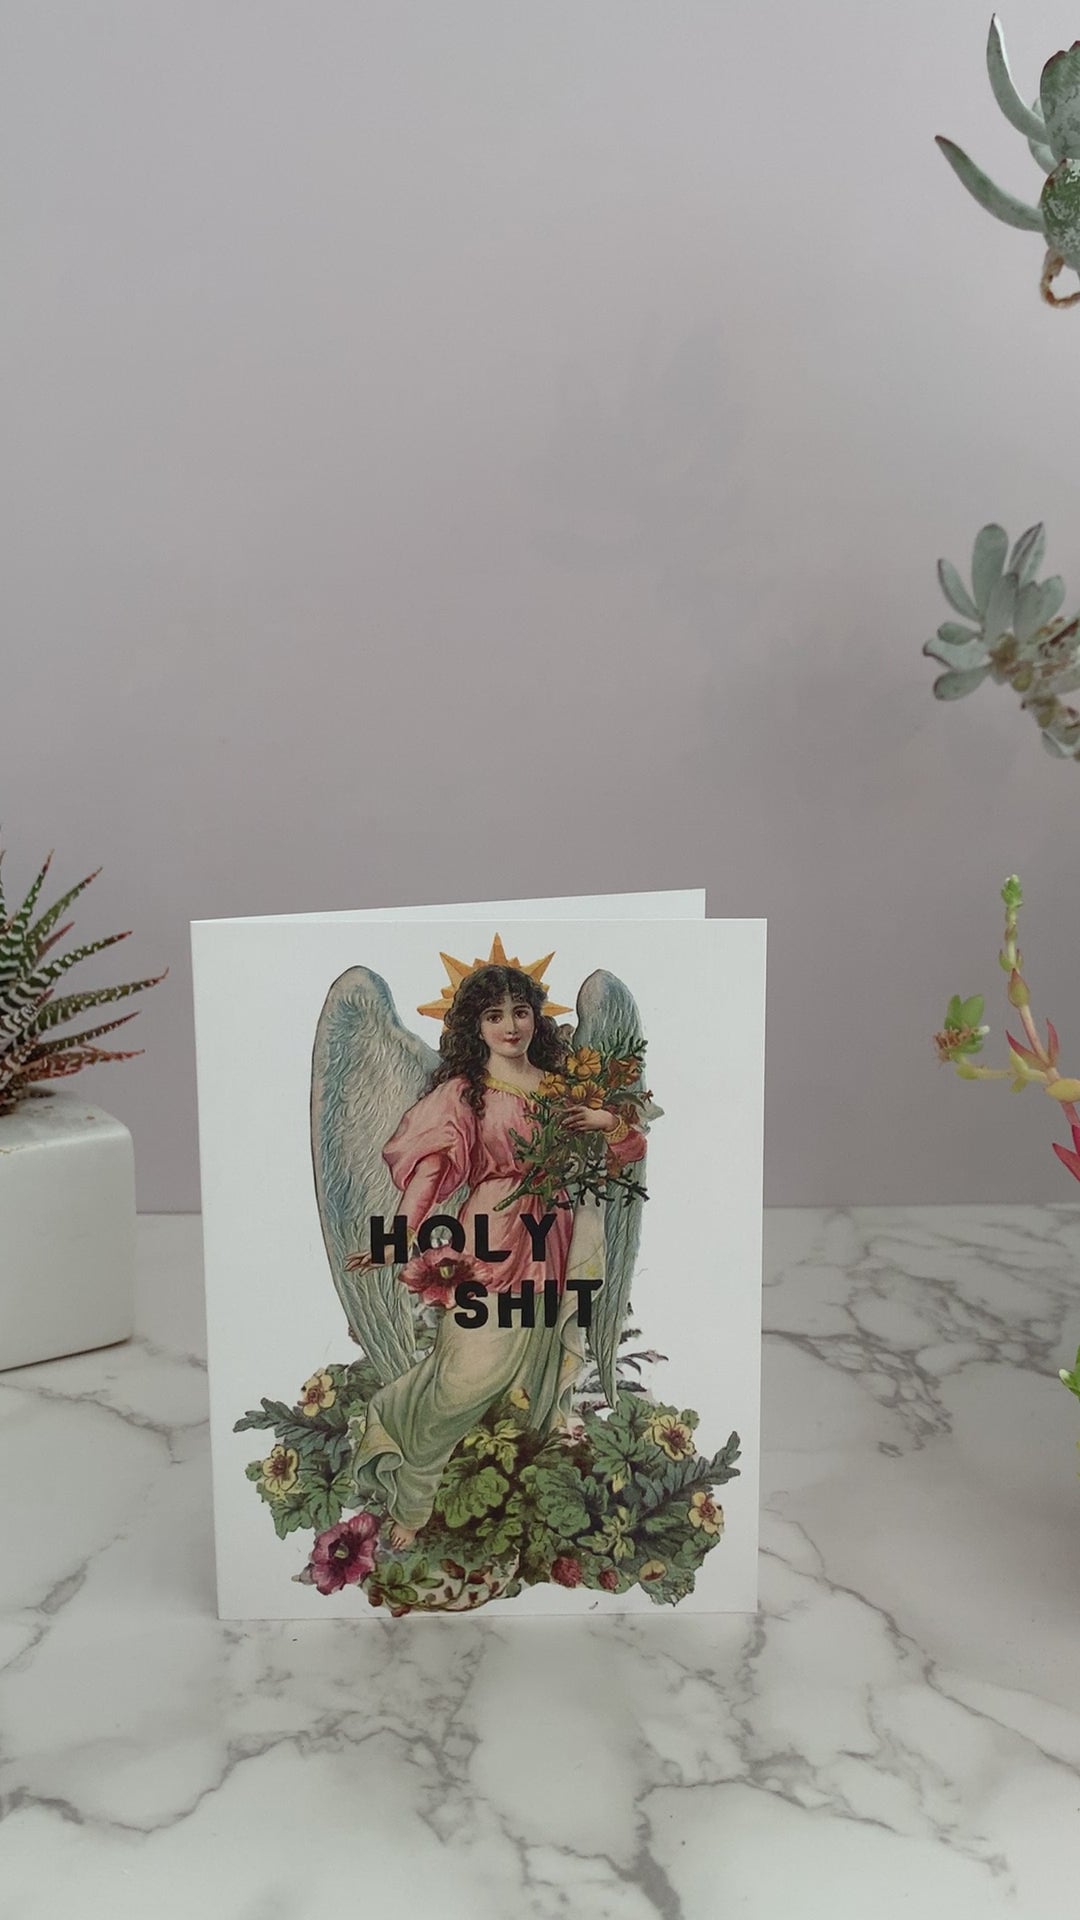 All purpose greeting card perfect for any occasion, like birthdays, celebrations, or just because. White card that features a vintage angel with flowers. Greeting says, "Holy Shit." Vintage colors of pinks, blues, greens, and yellows. Blank inside